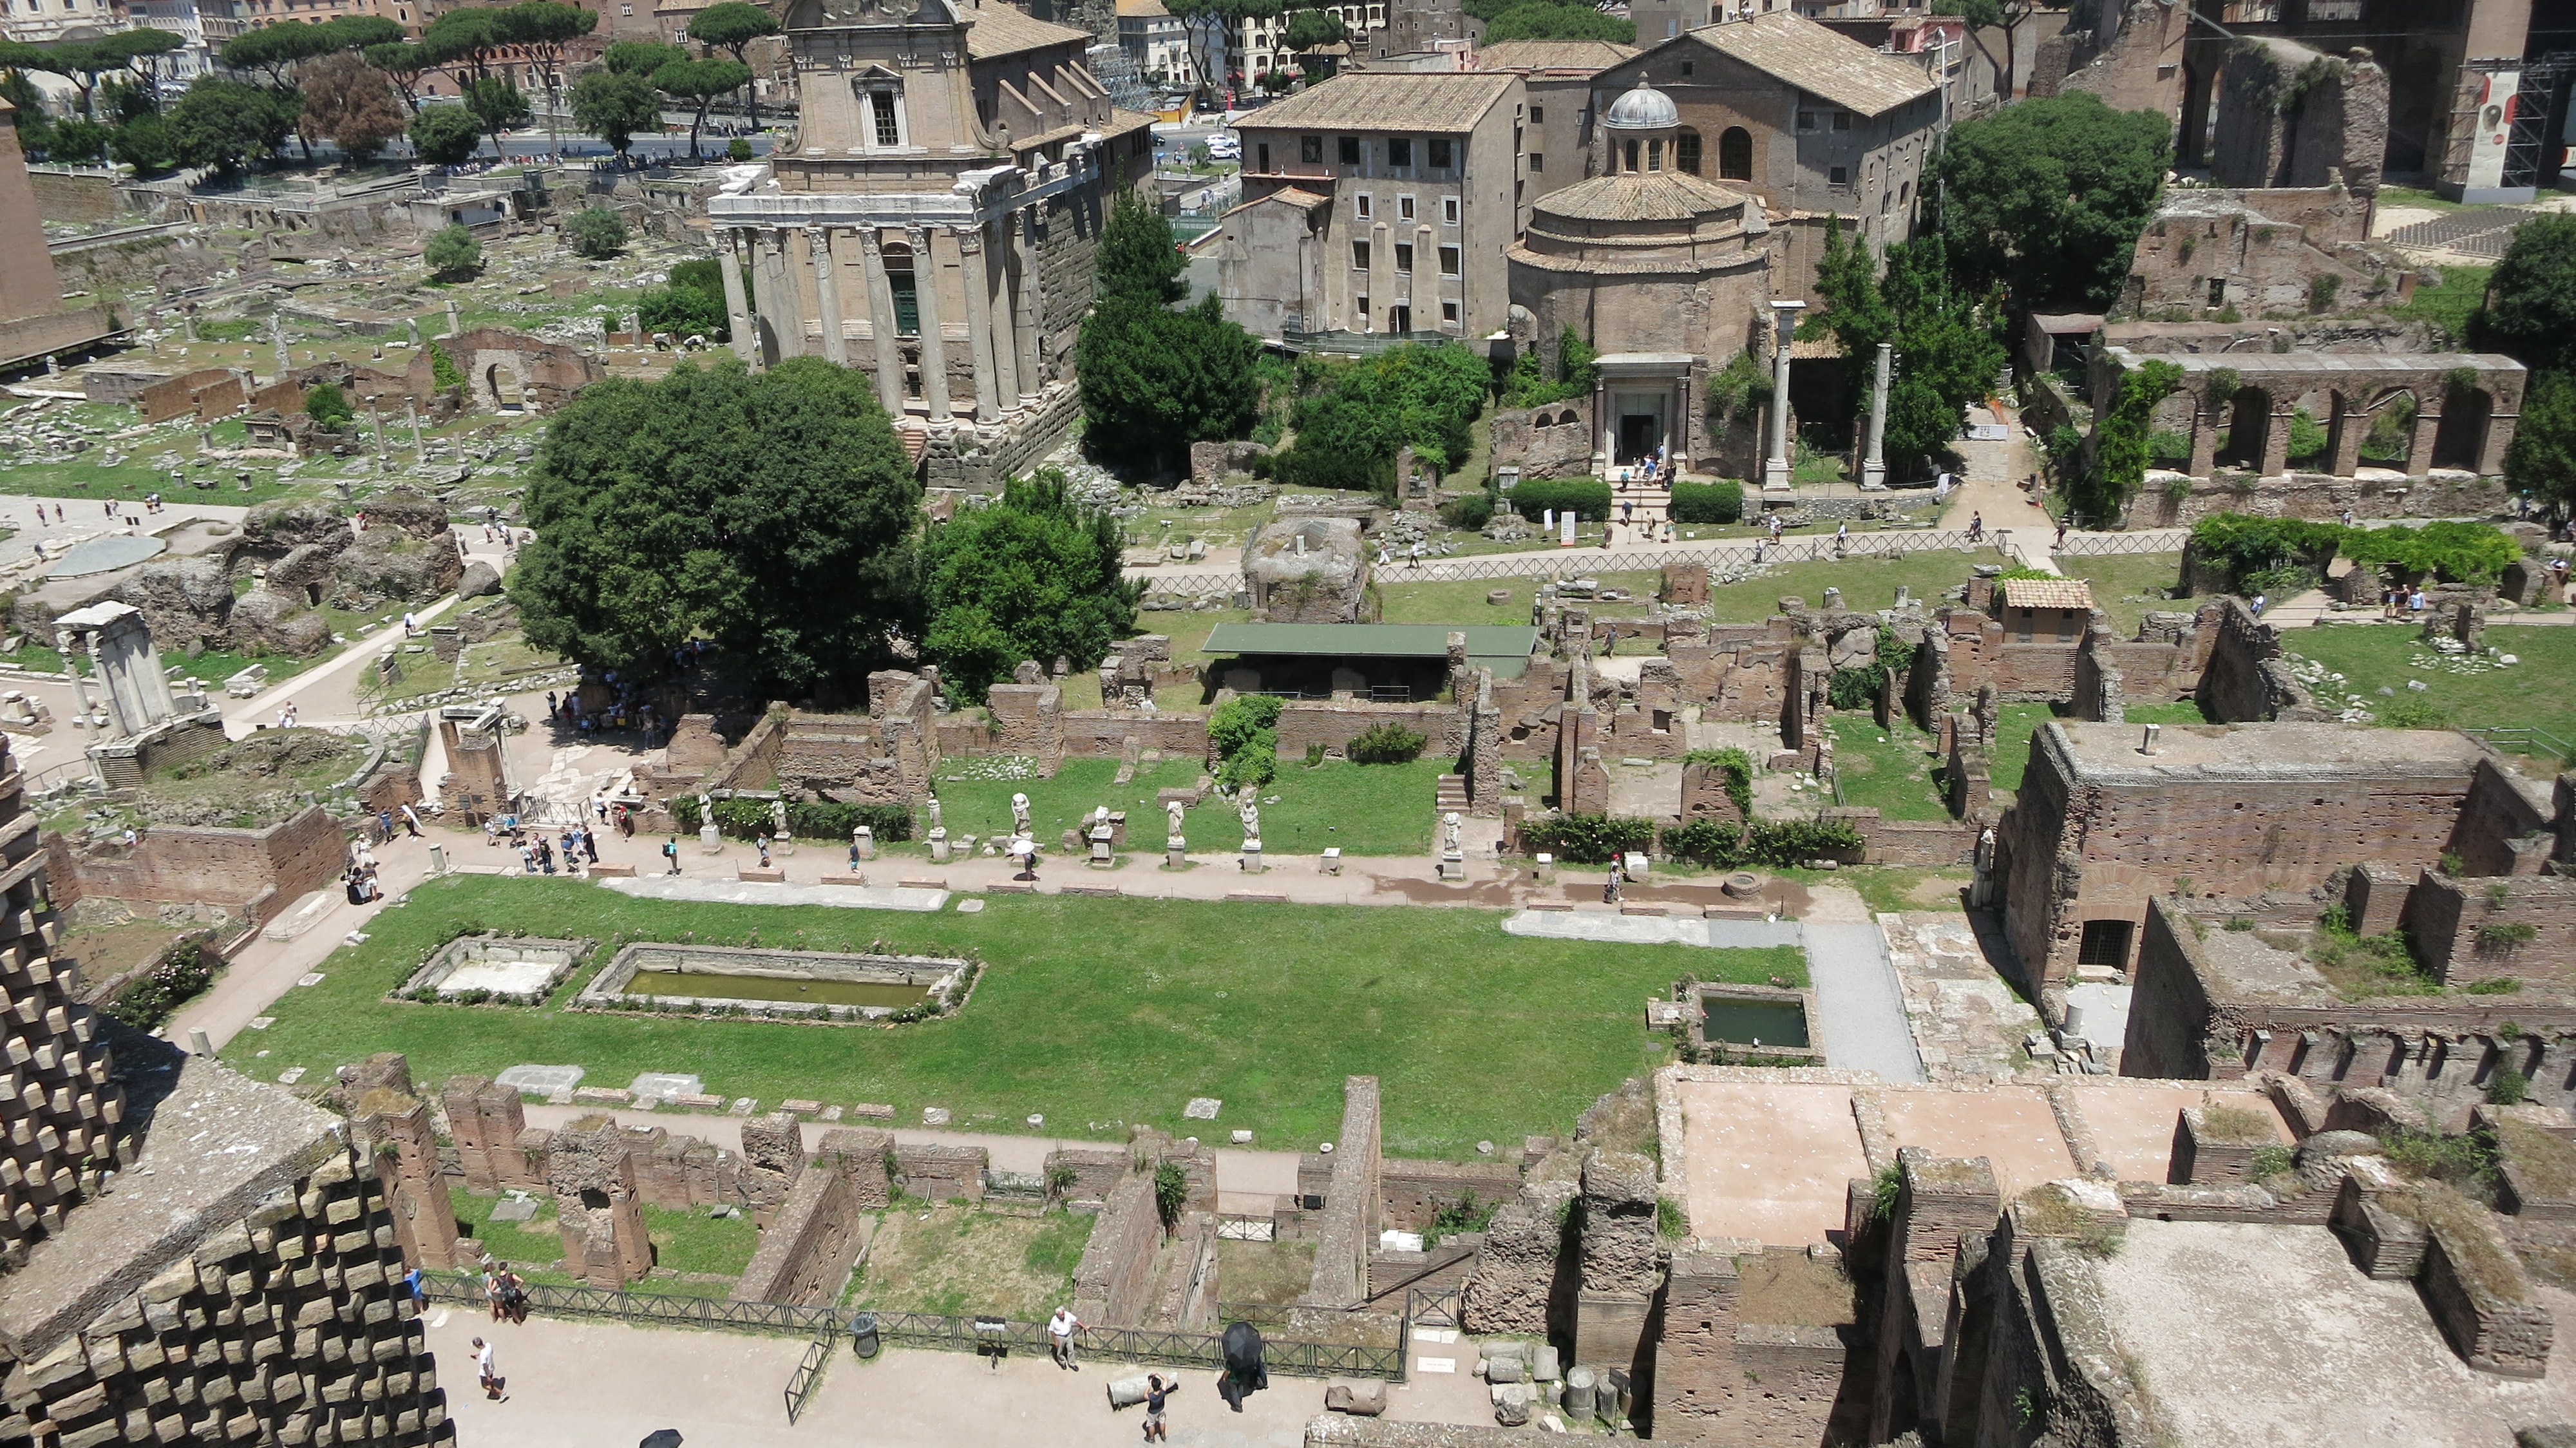 
                       Figure 2: A view of the forum from the Palatine
                  